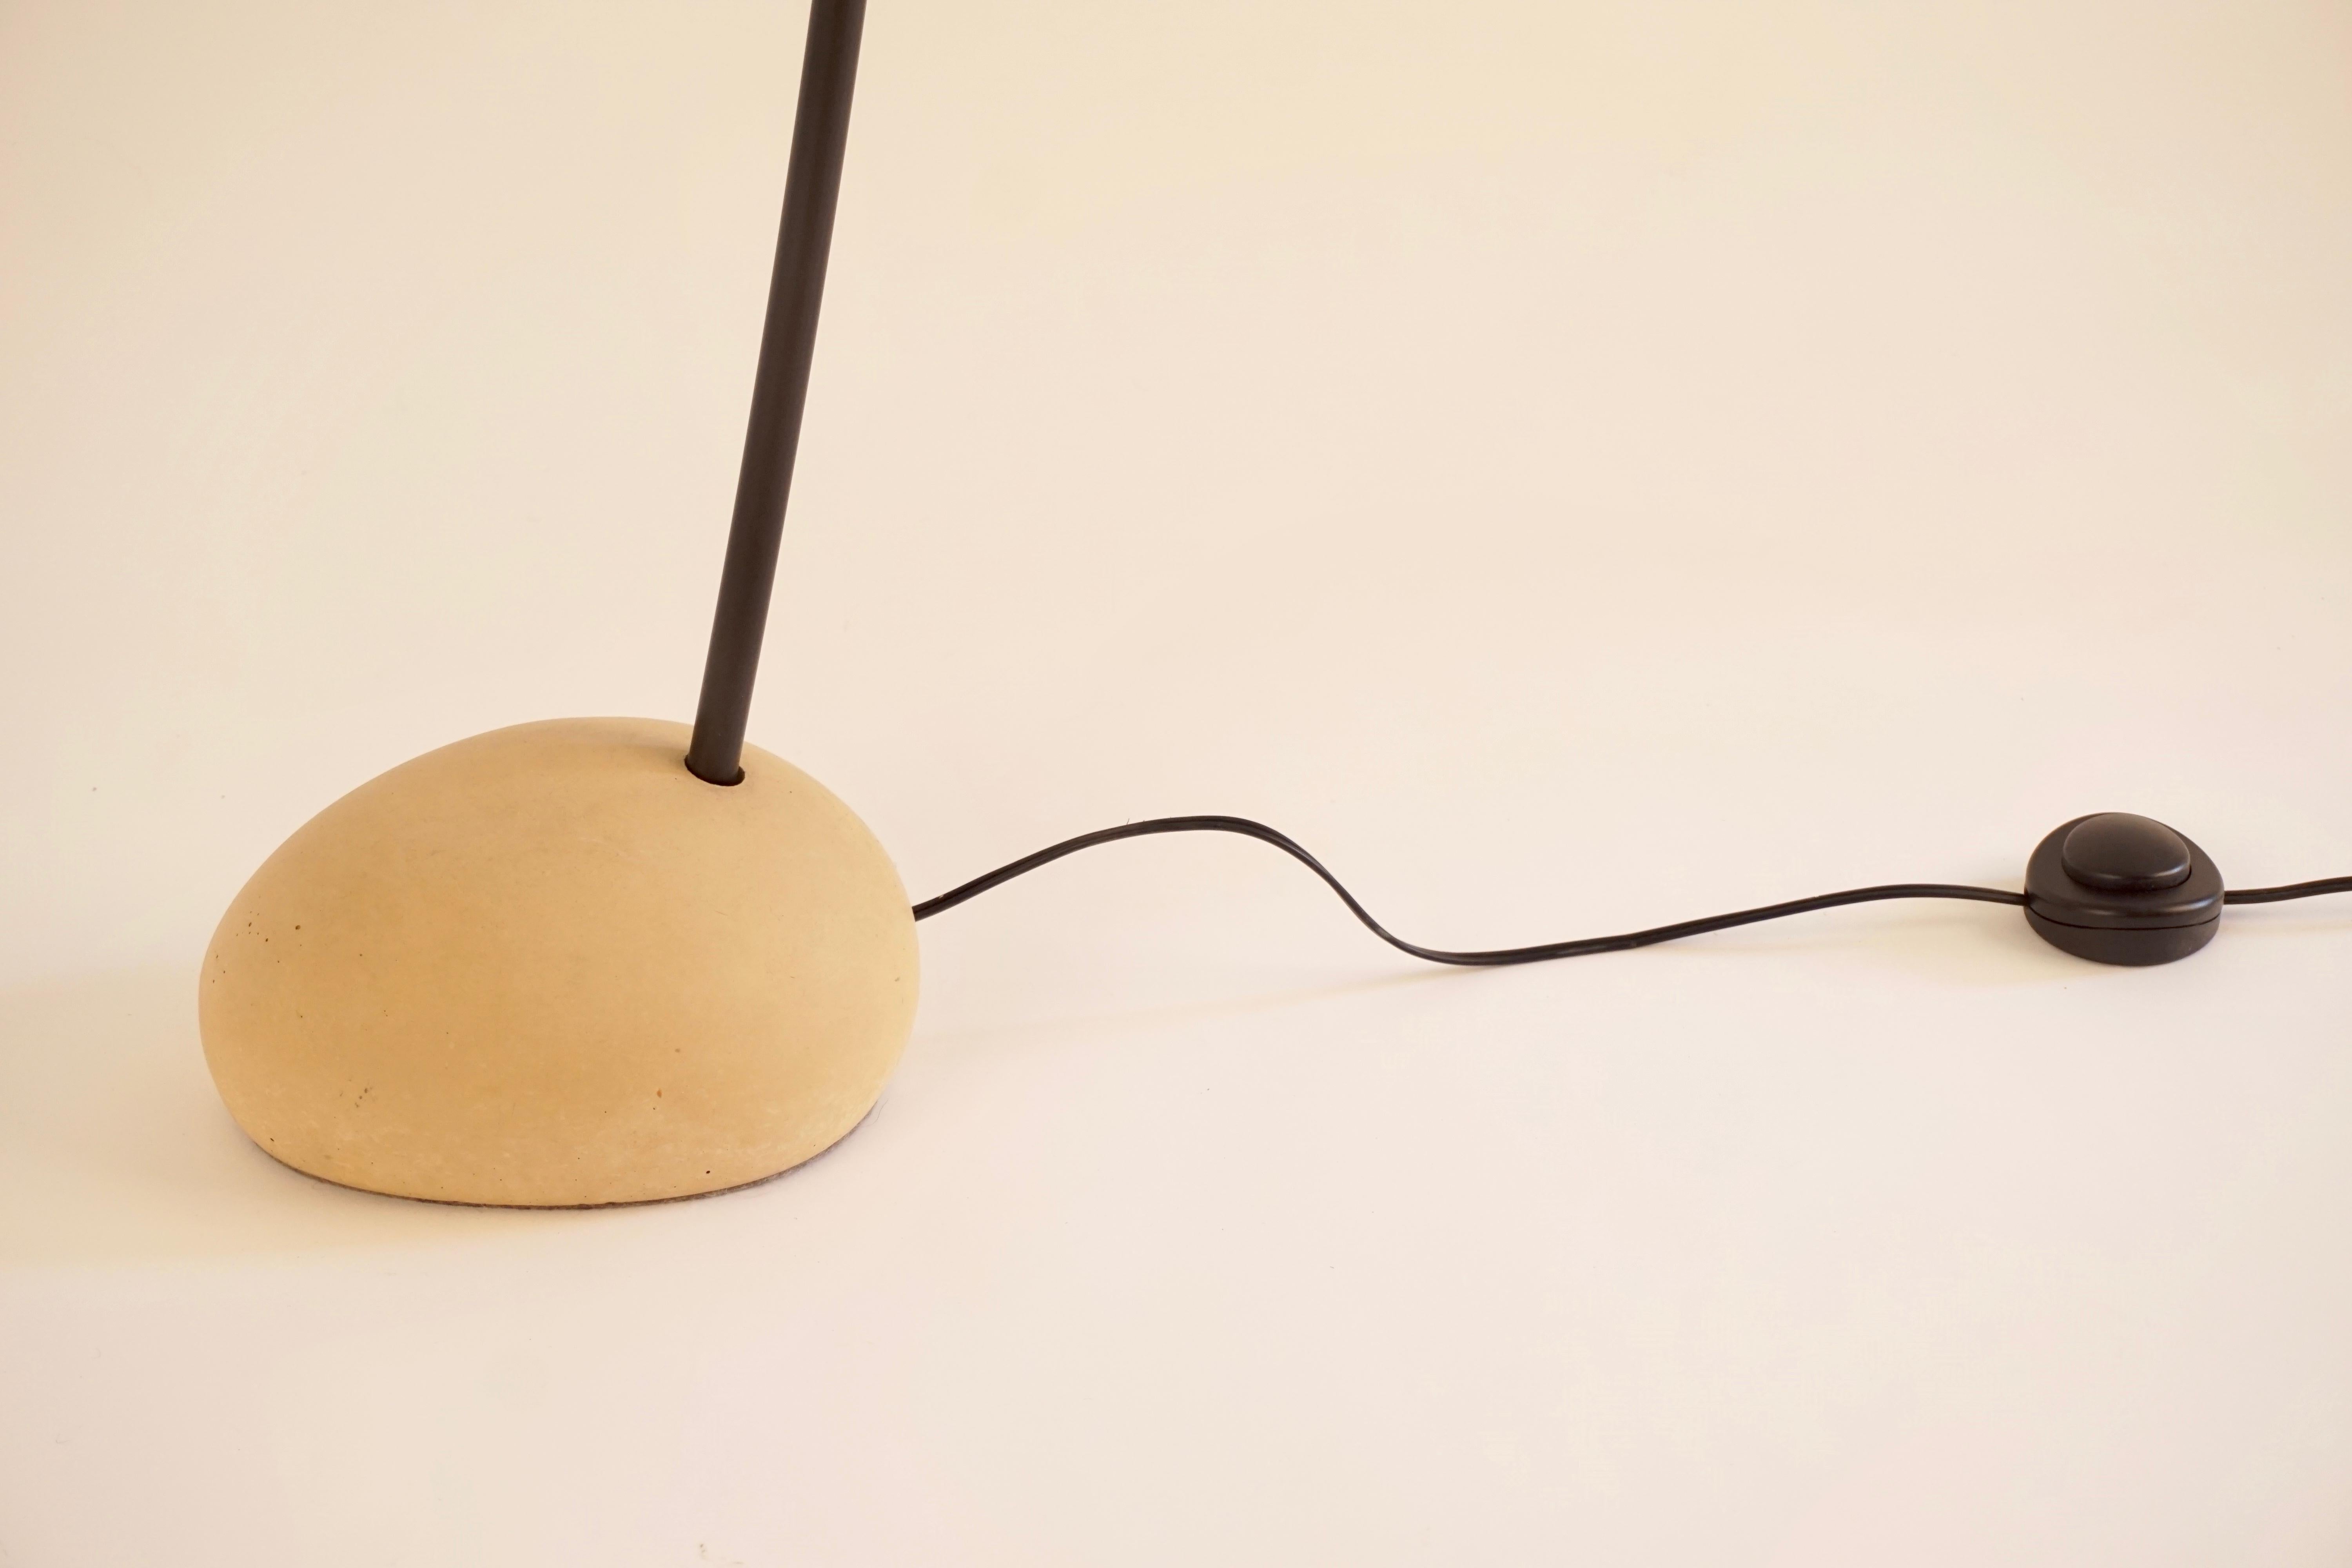 American Skye Floor Lamp Medium, with Spun Bronze Shade and Stone Shaped Cement Base